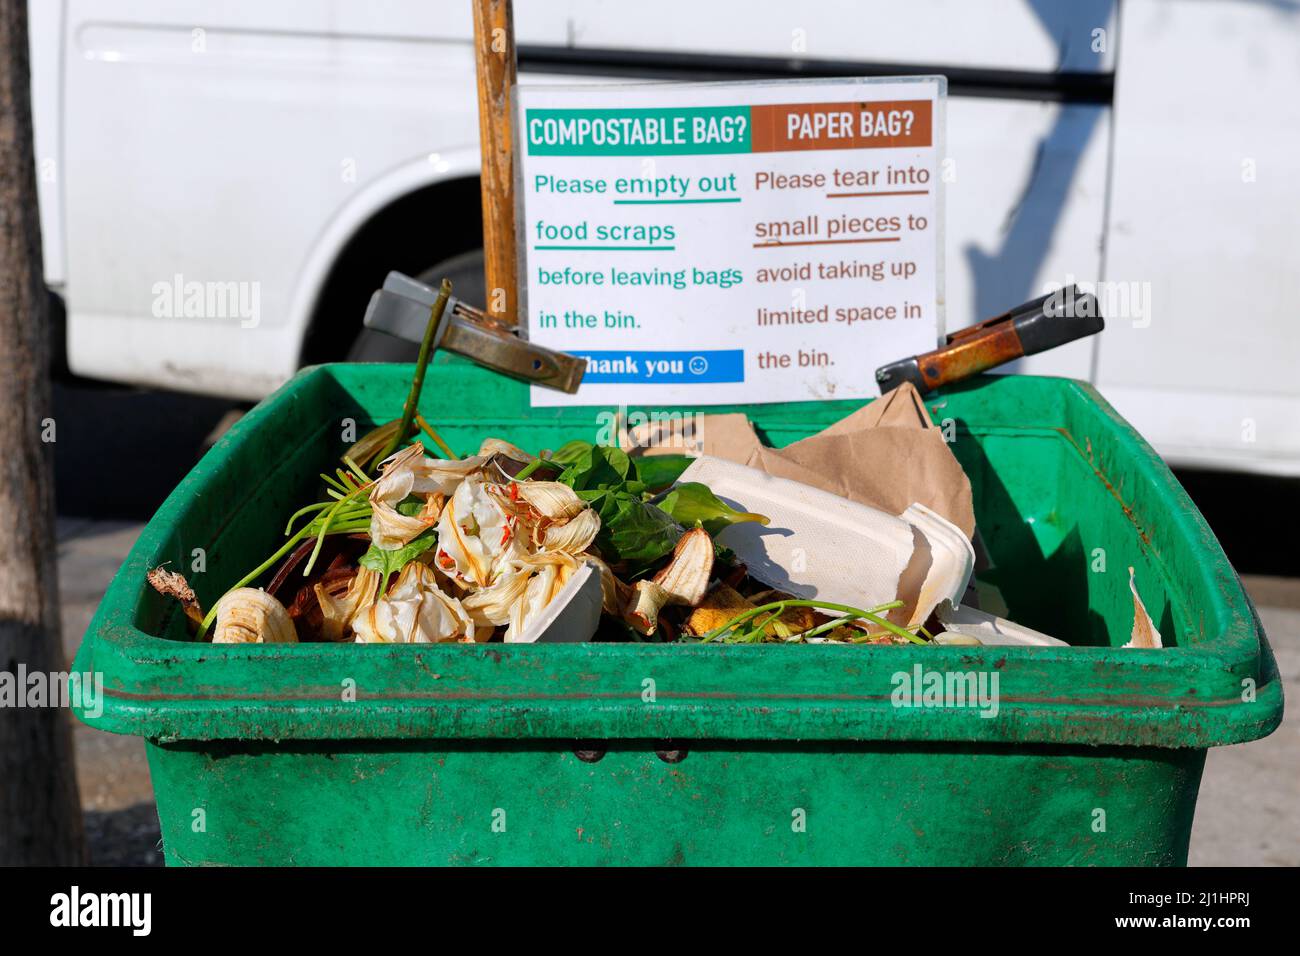 Food scraps in a composting bin at Union Square Greenmarket, New York. Food waste at this location are collected by the LES Ecology Center for compost Stock Photo